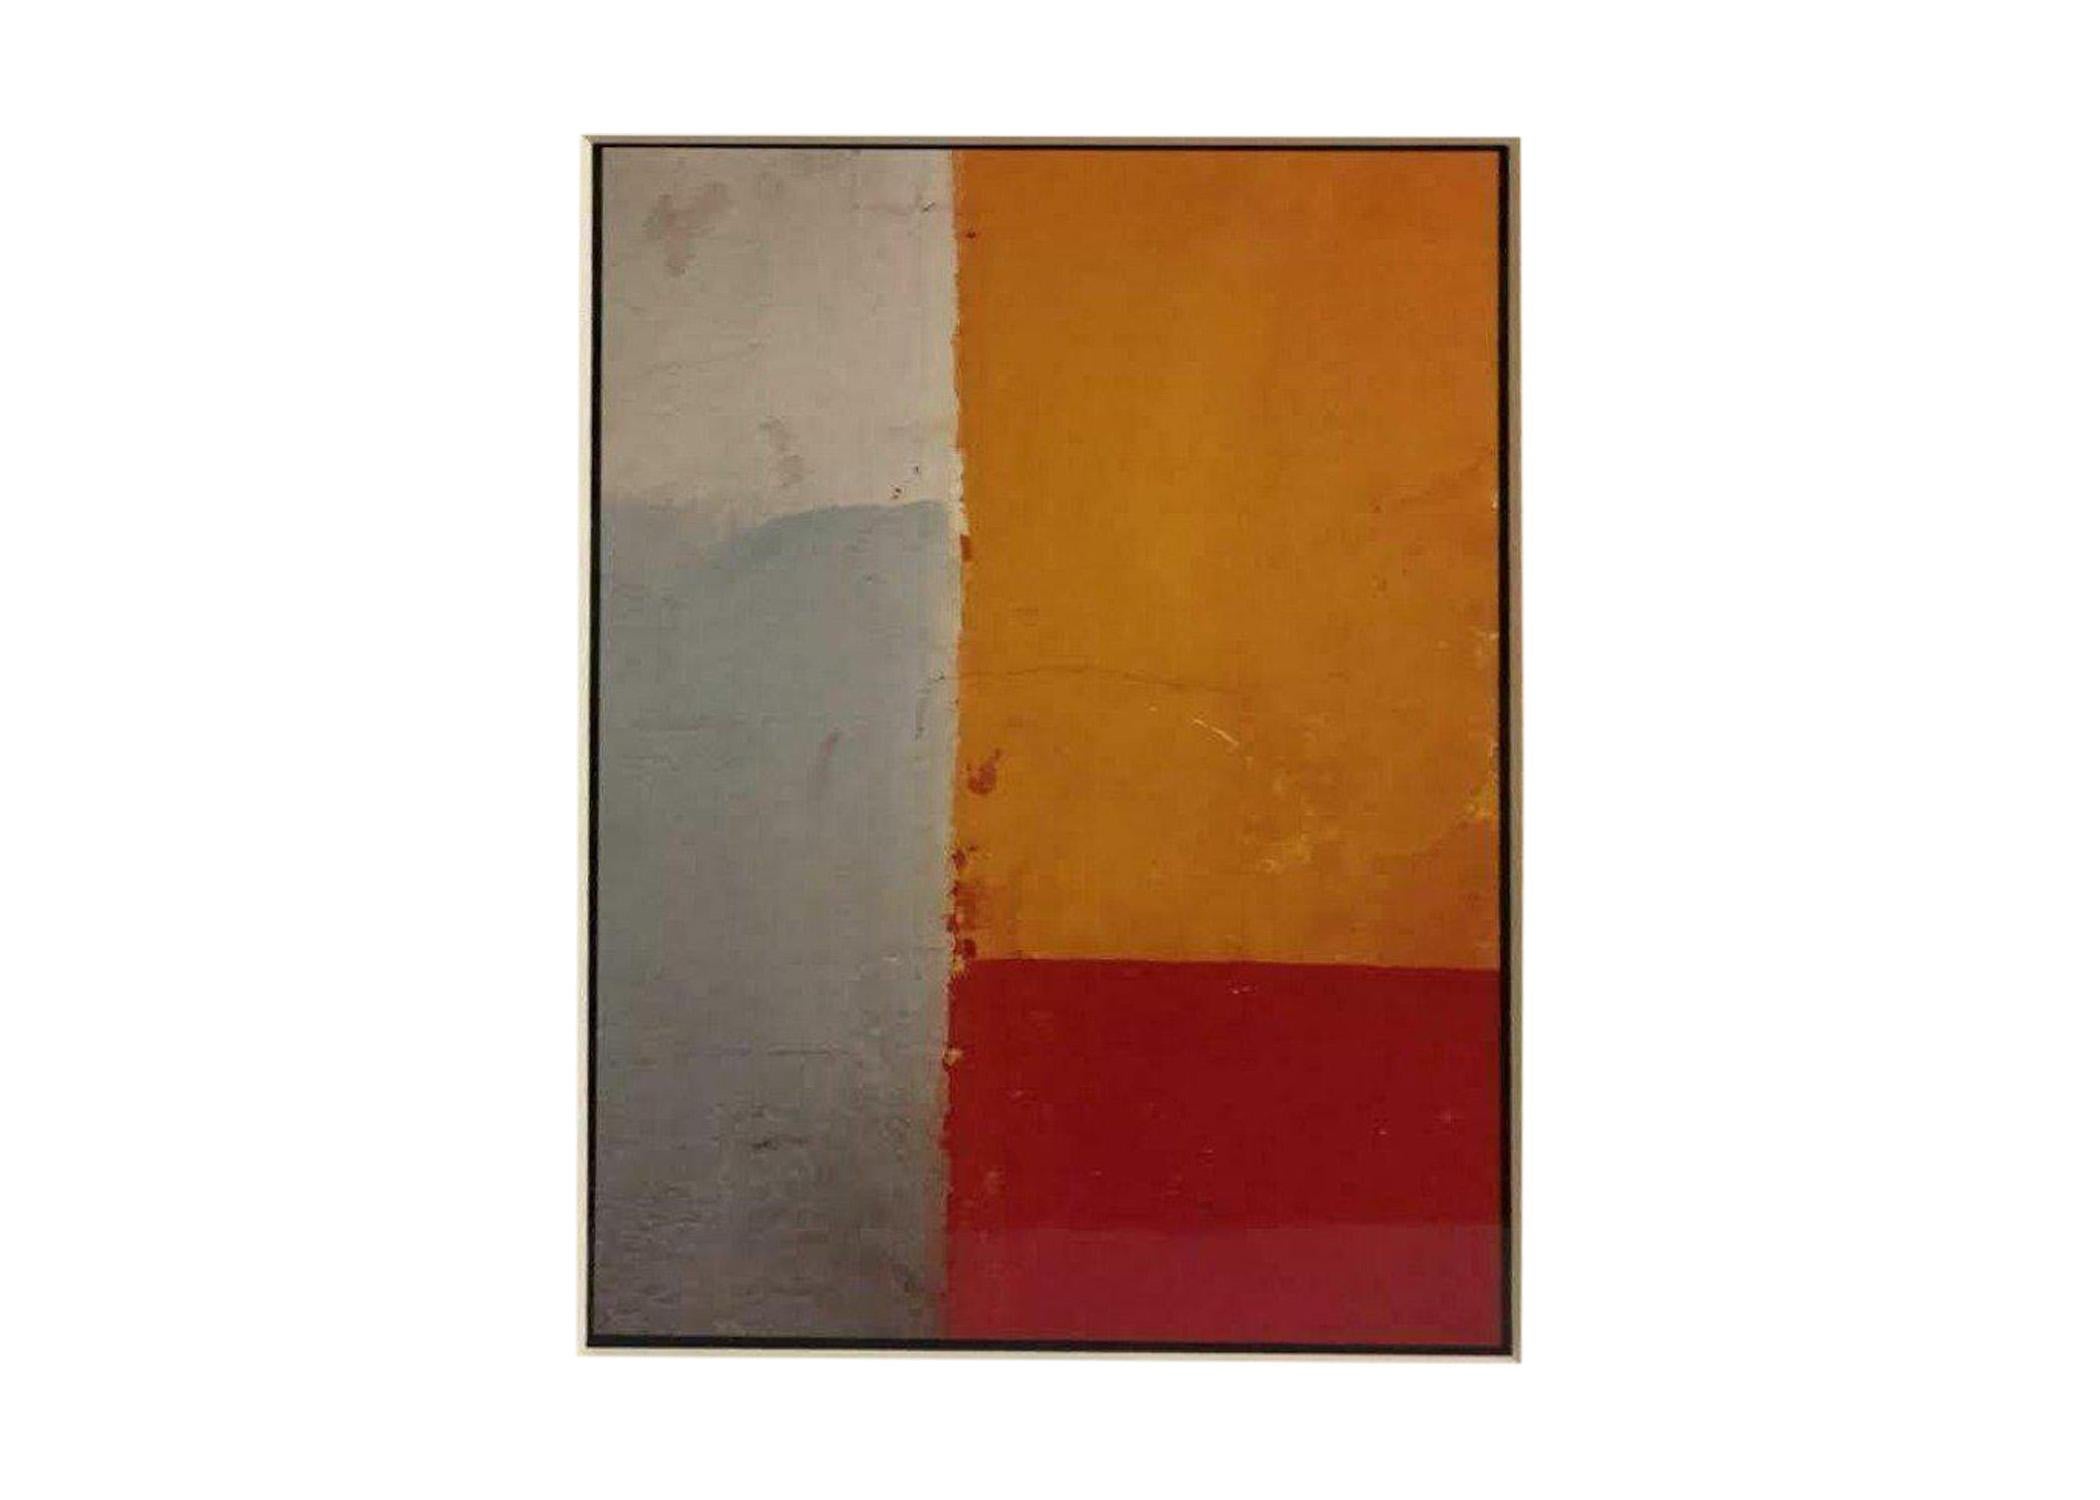 An abstract colors print titled "Passage" by the photograph artist Patricia Wilder. The photograph made from original slide transparency and printed in traditional dark room chemistry. The print is finely matted and framed. Patricia Wilder,